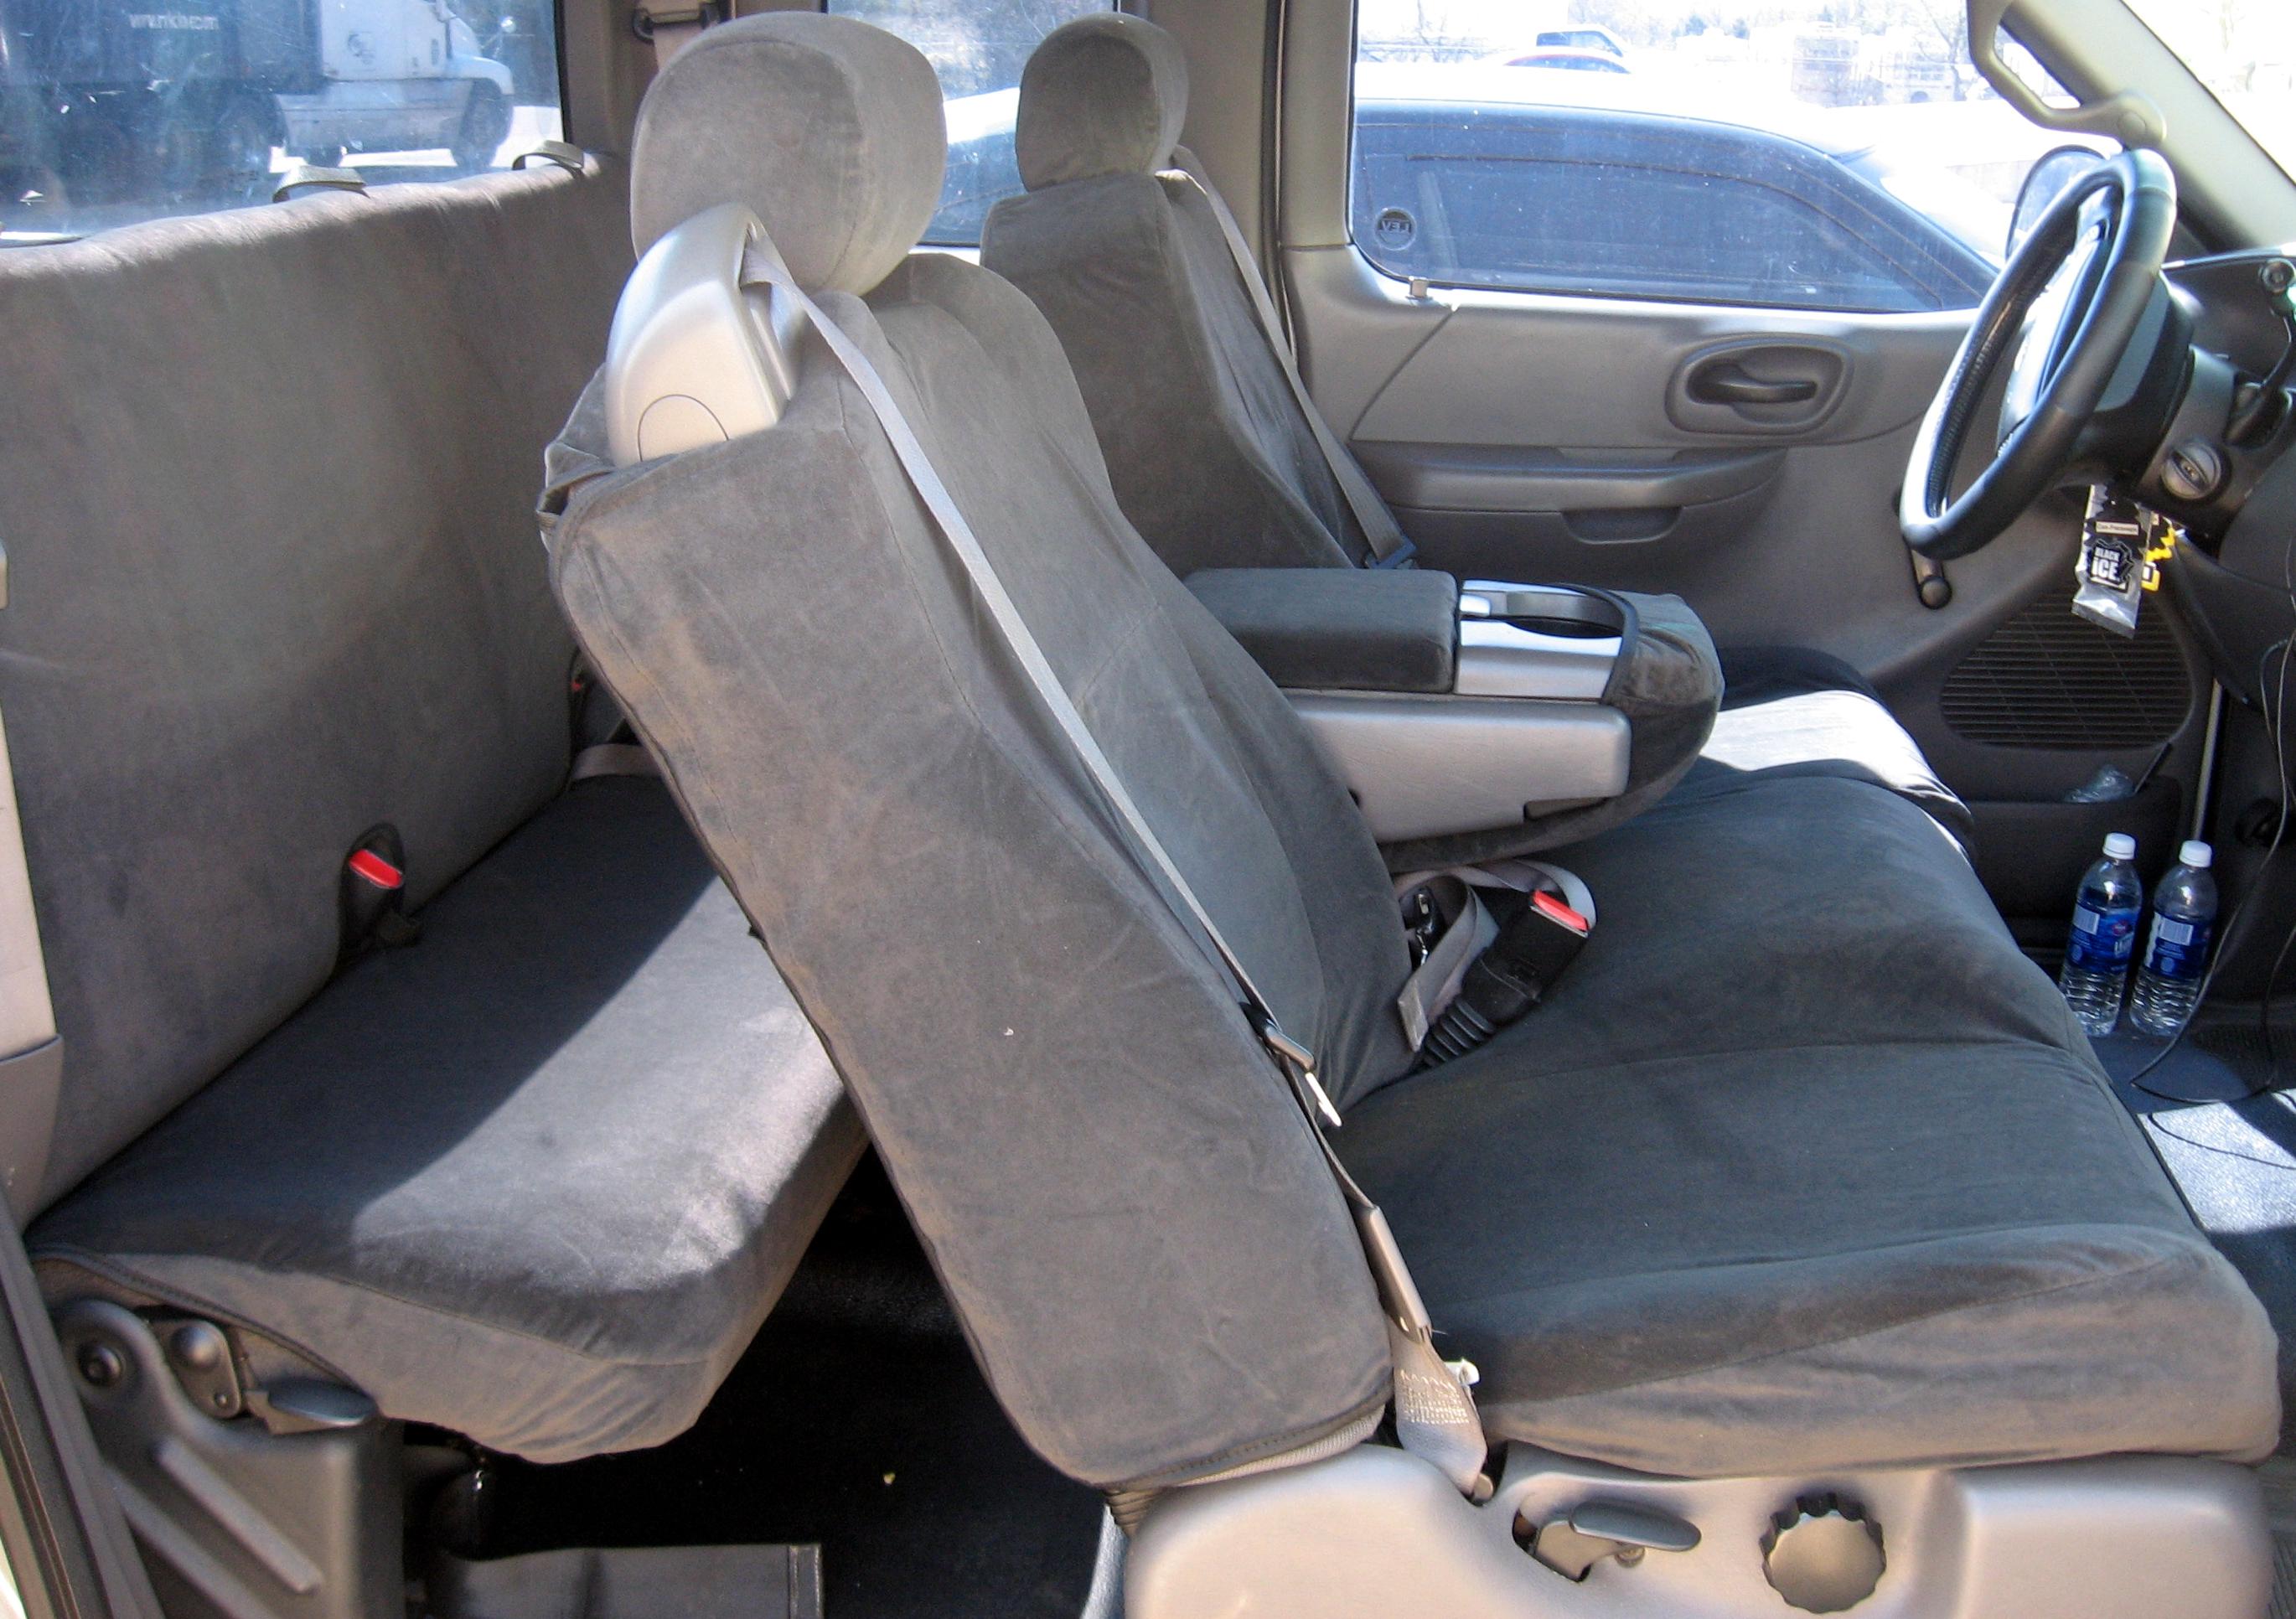 Durafit Seat Covers, F369-XD3-C, 2004-2008 Ford F150 Xcab, Front 40/20/40,  Seat Belts Come from top of seat, NOT for Double CAB, XD3 Camo Waterproof